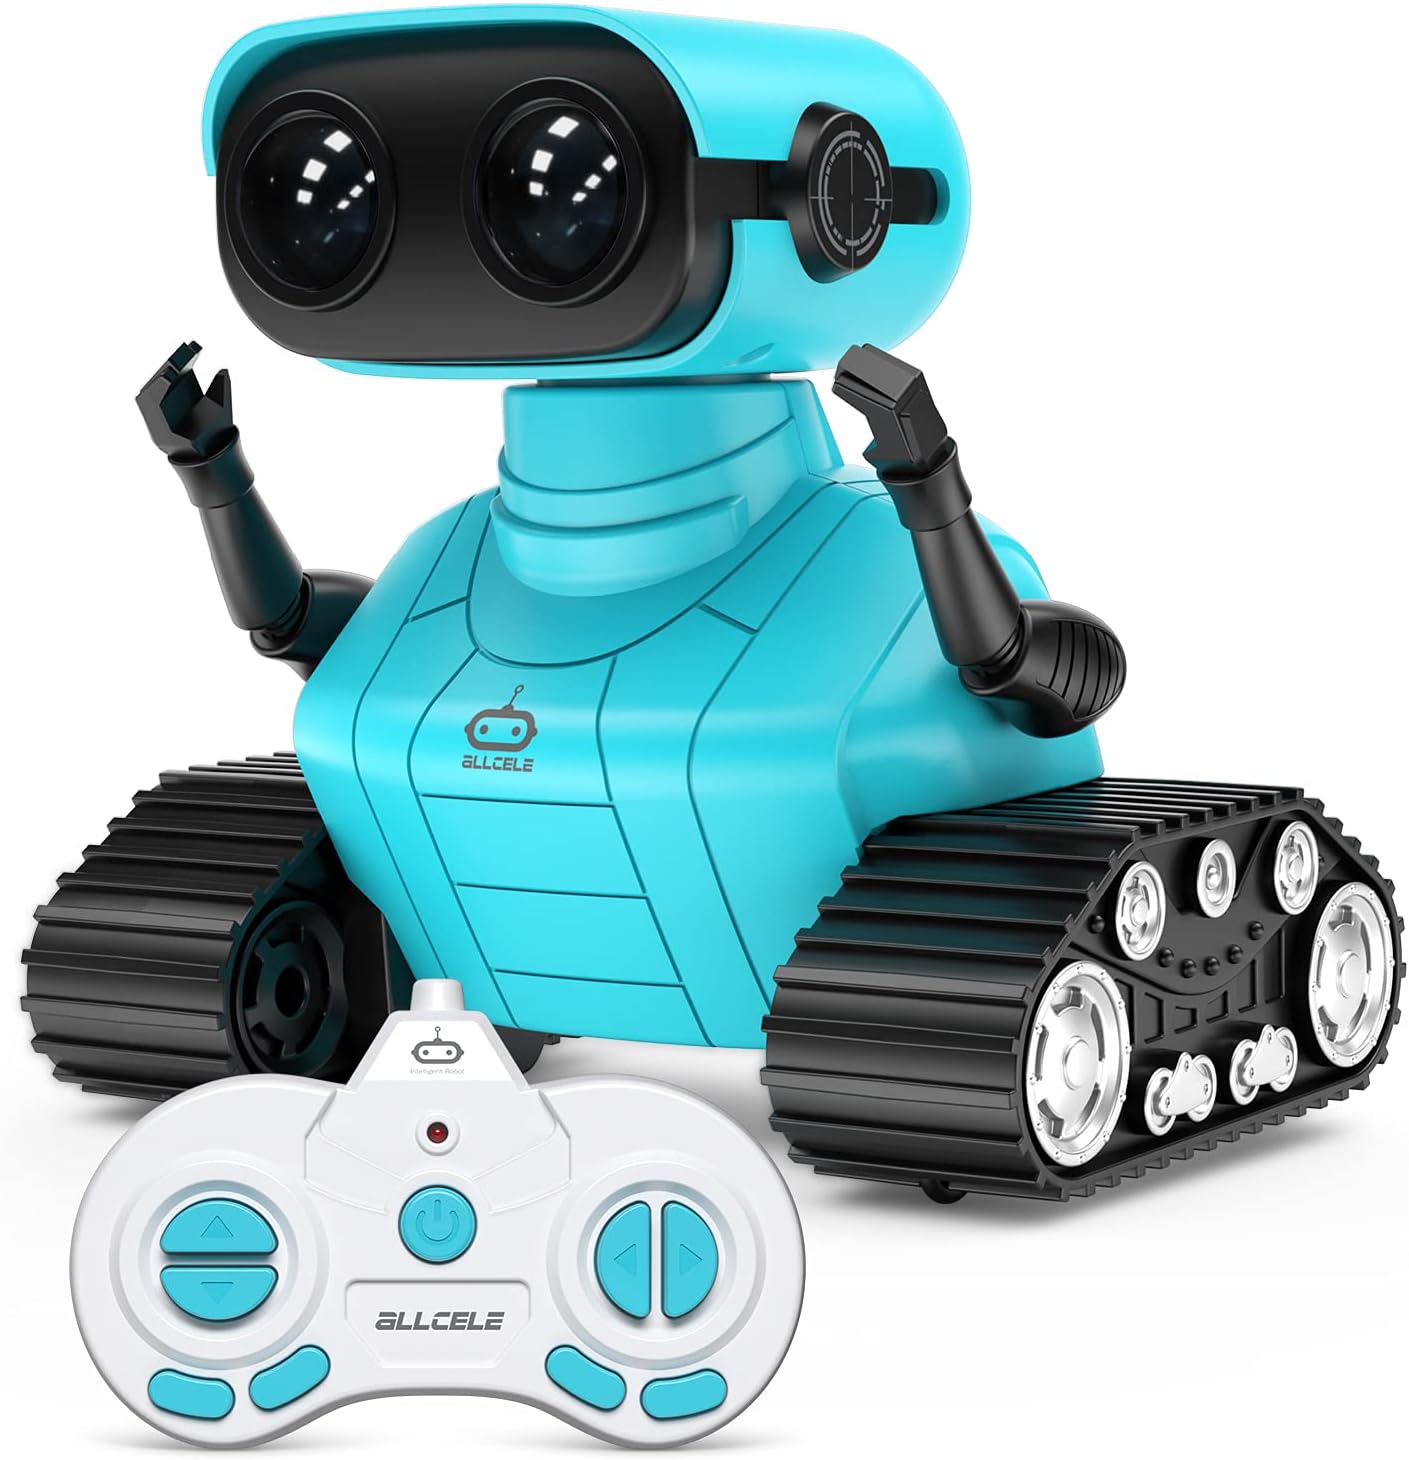 Robot Toys, Rechargeable RC Robots for Kids Boys, Remote Control Toy with Music and LED Eyes, Gift for Children Age 3 Years and Up - Yellow